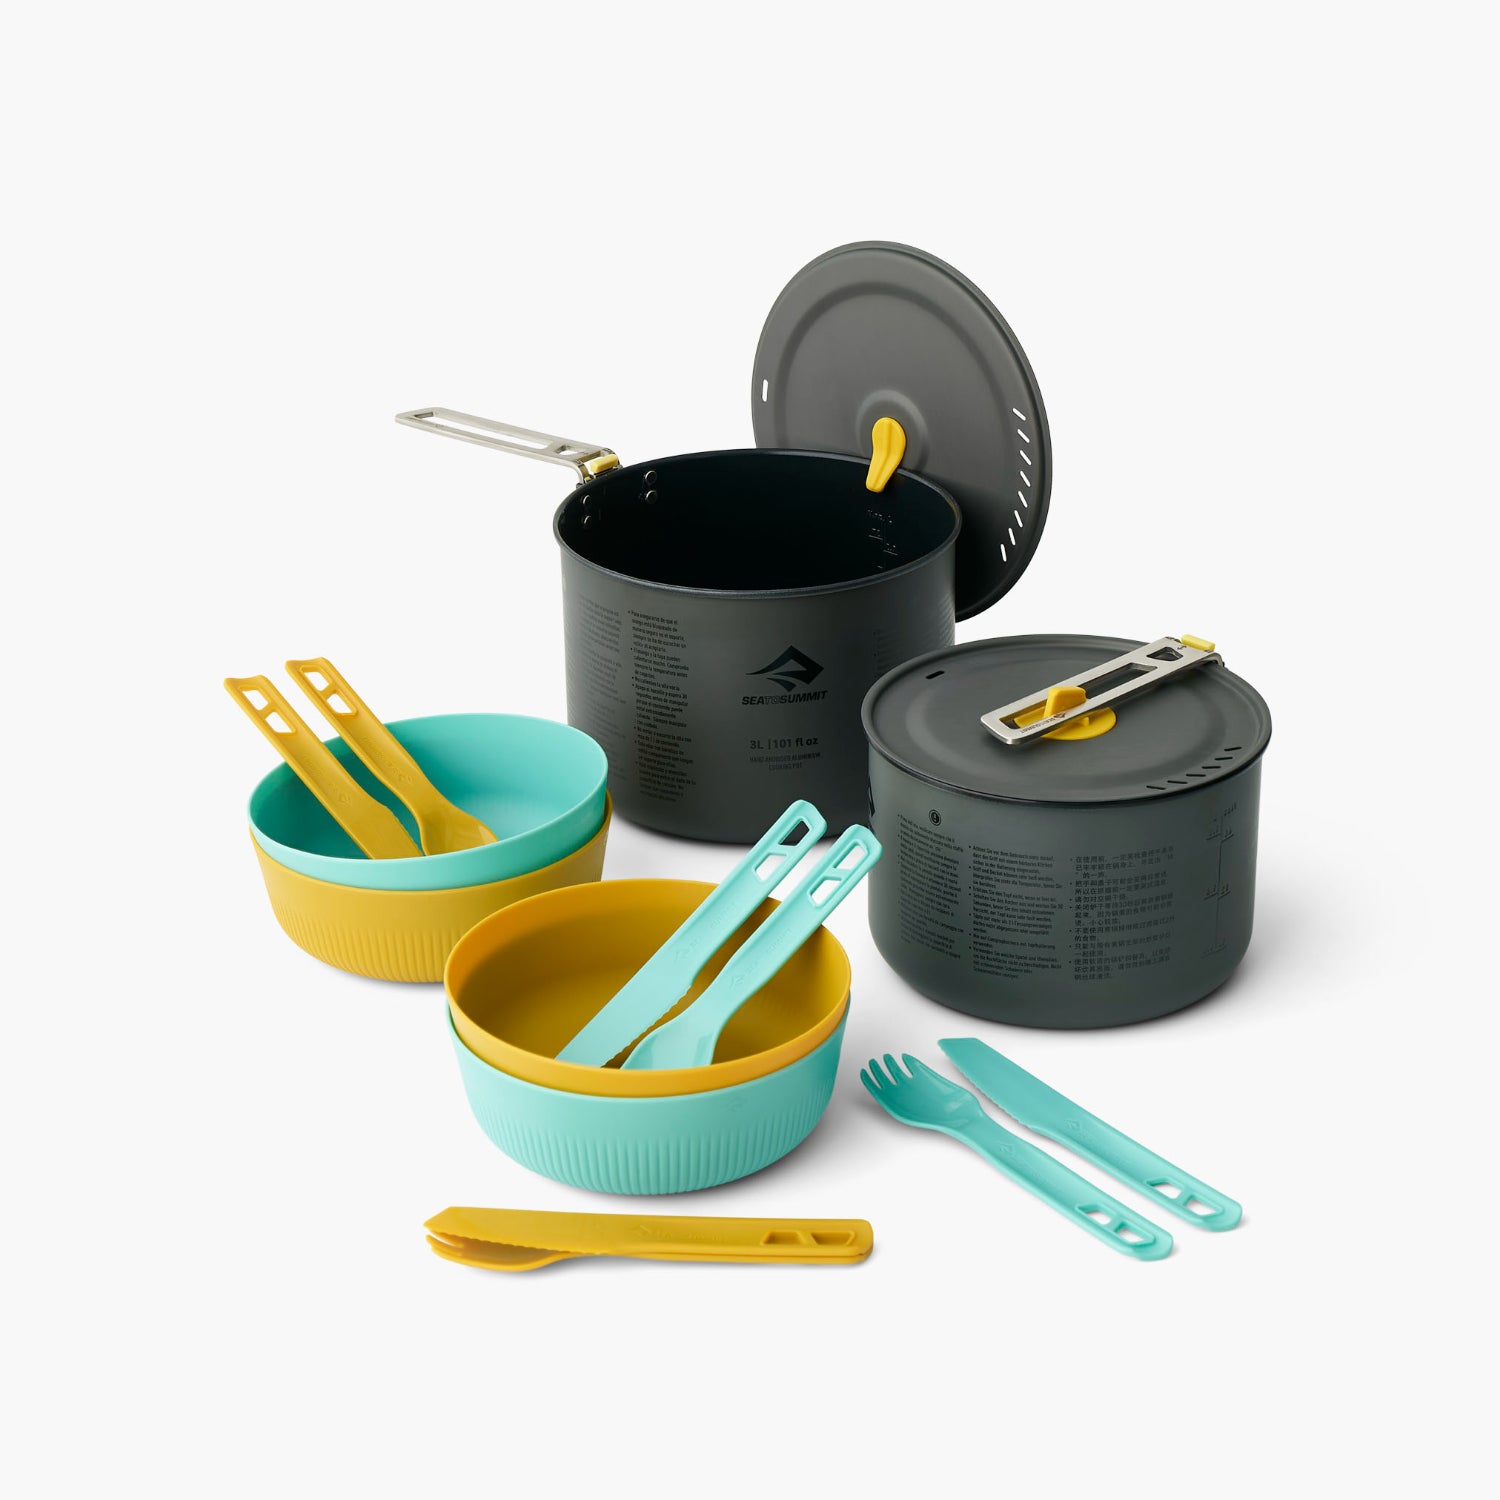 Sea to Summit Frontier Ultralight Two Pot Cook Set (4 Person, 14 Piece)